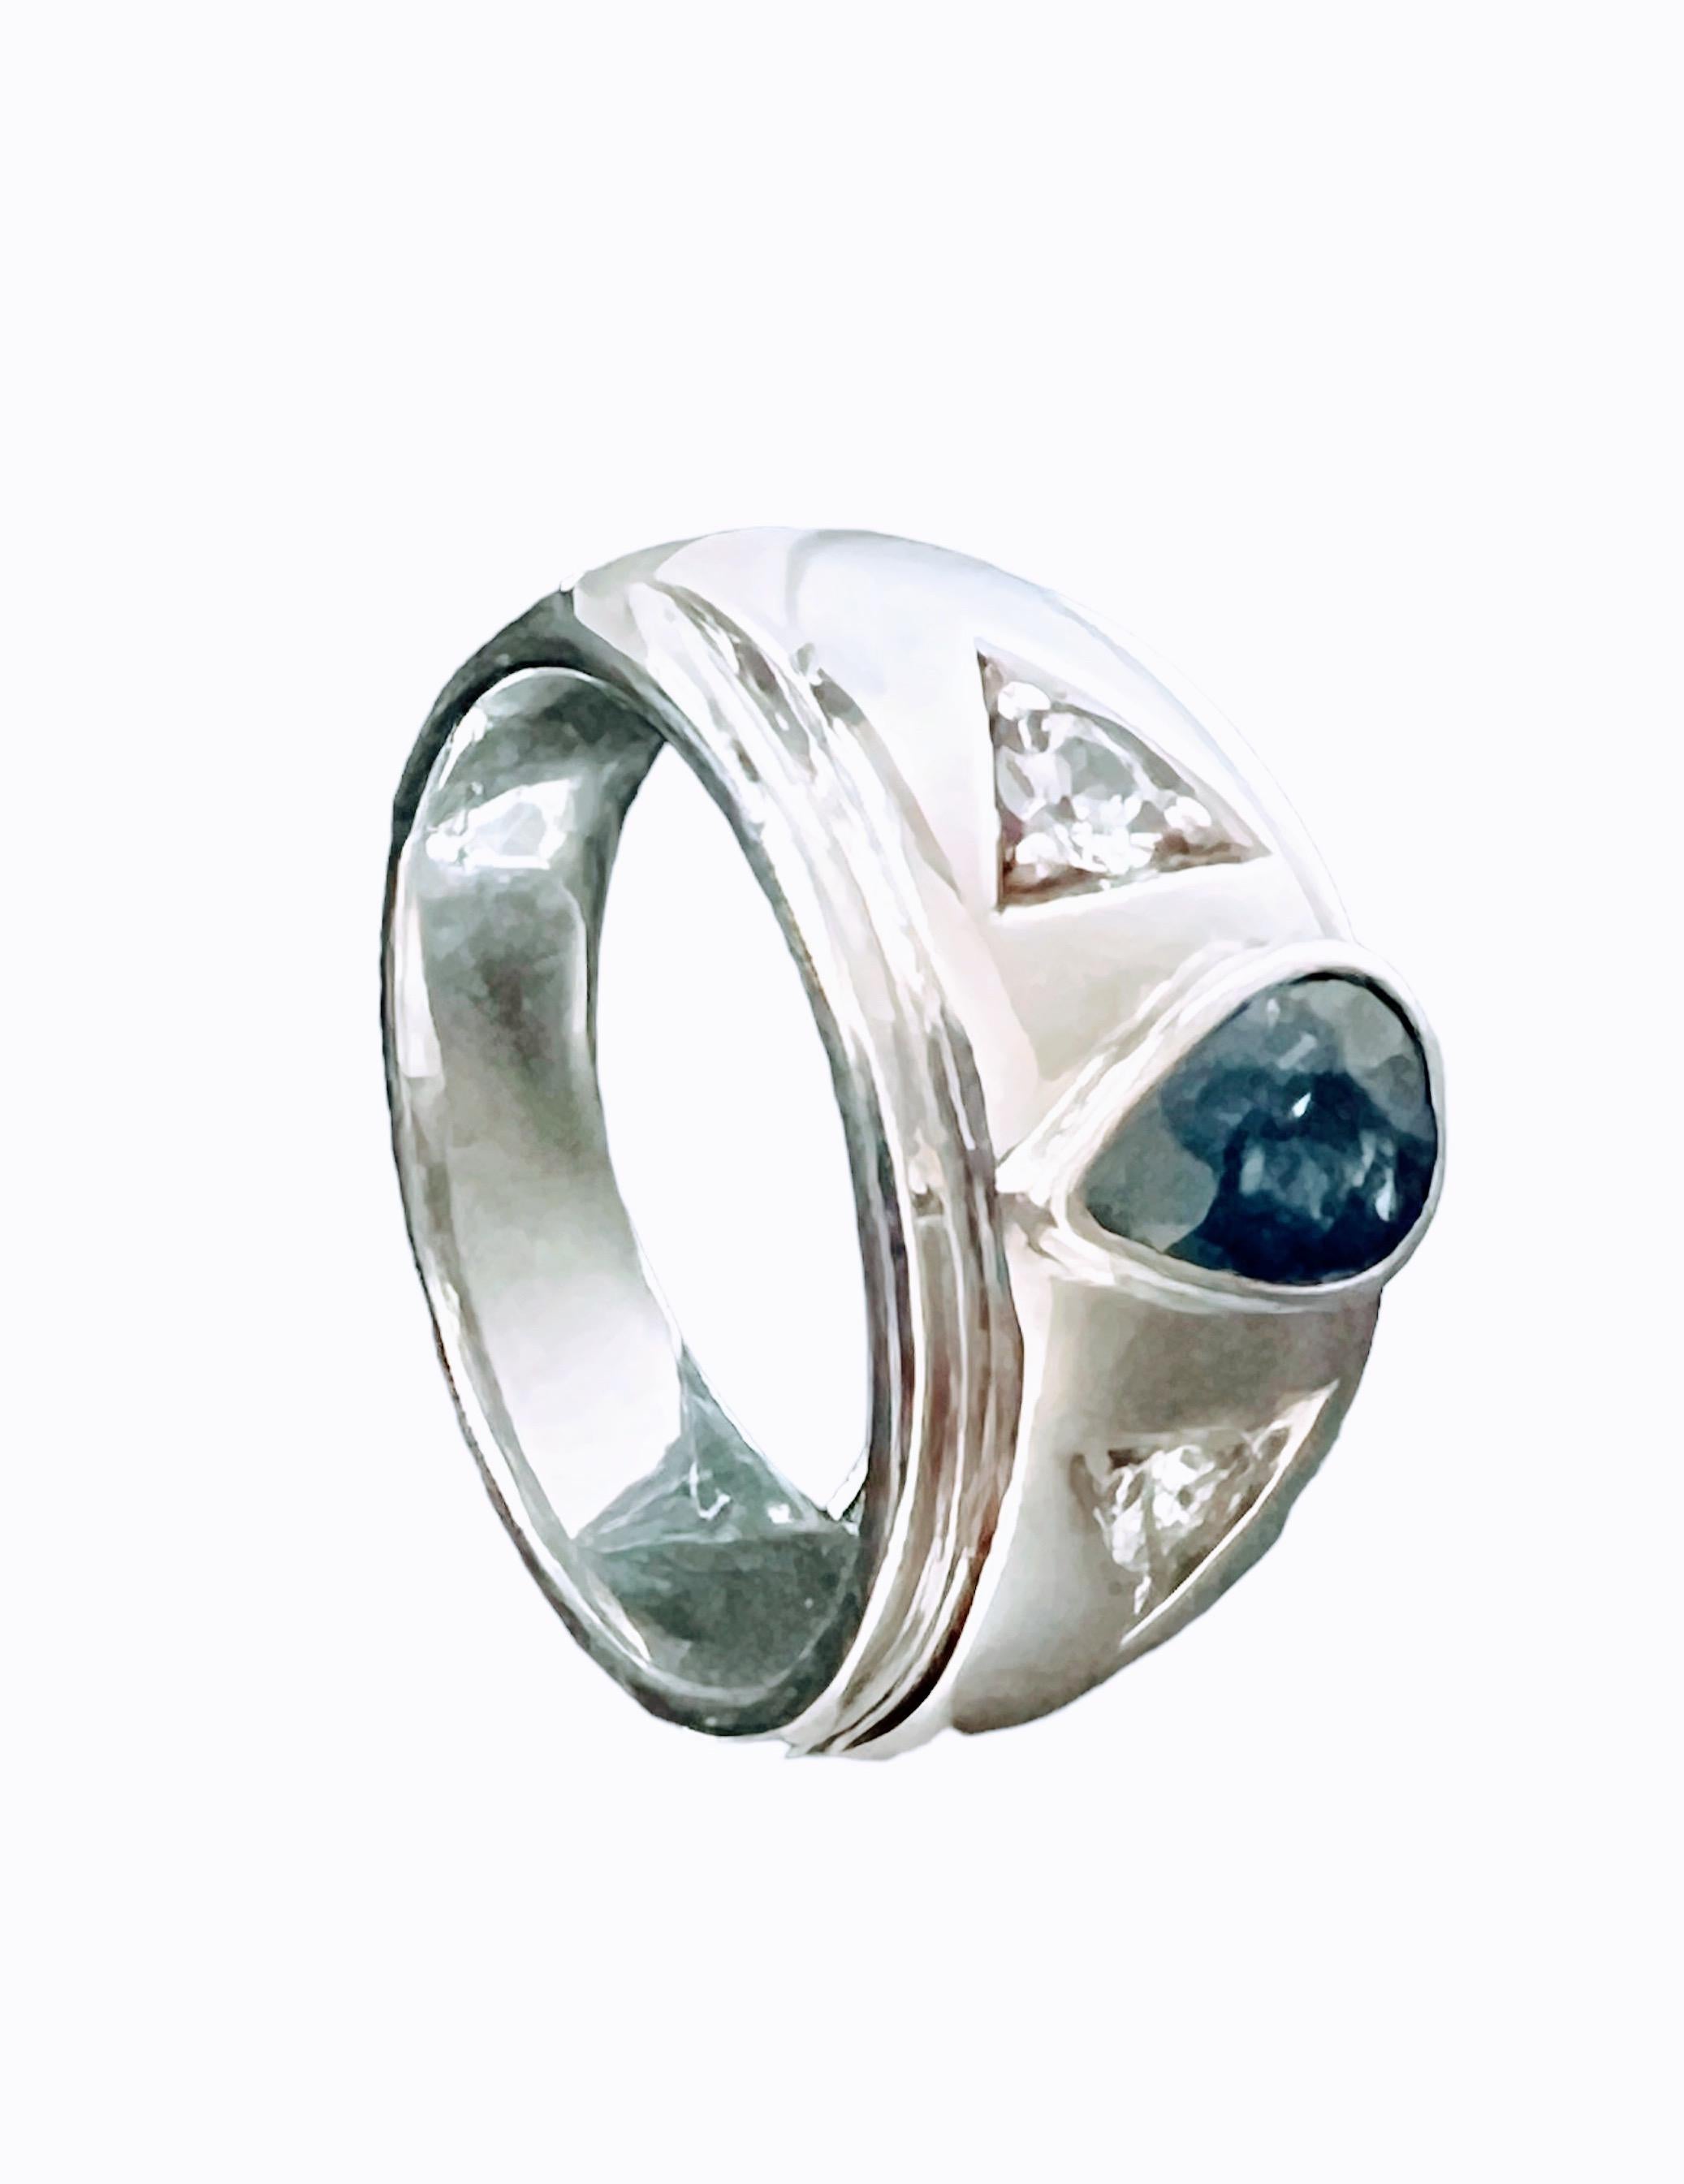 Elevate your style with our captivating 1.5ct Pear shaped Natural Blue Sapphire Dome Ring made of platinum coated sterling silver. This stunning piece showcases a natural, untreated Pear shaped blue sapphire, exuding deep and mesmerizing hues. The